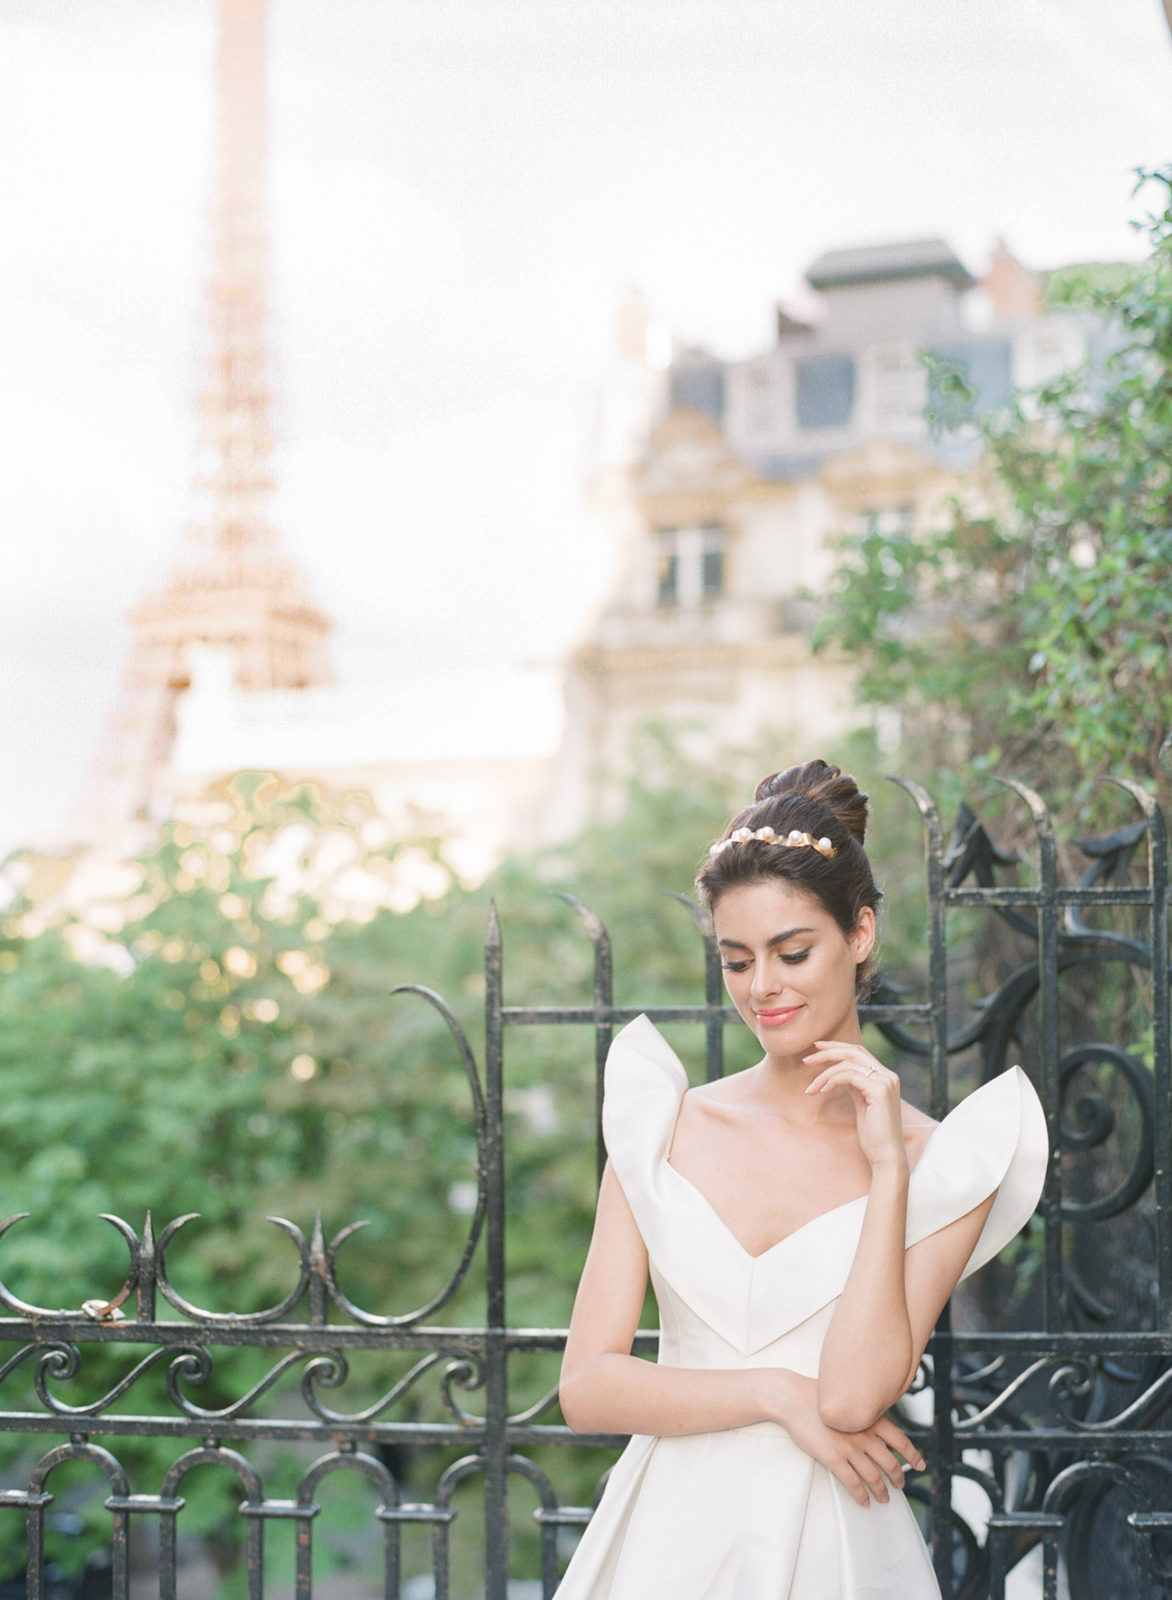 Musee Rodin Wedding Photography by Molly Carr Photography | Paris Fine Art Film Photographer | France Wedding Photographer | Luxury Wedding Europe